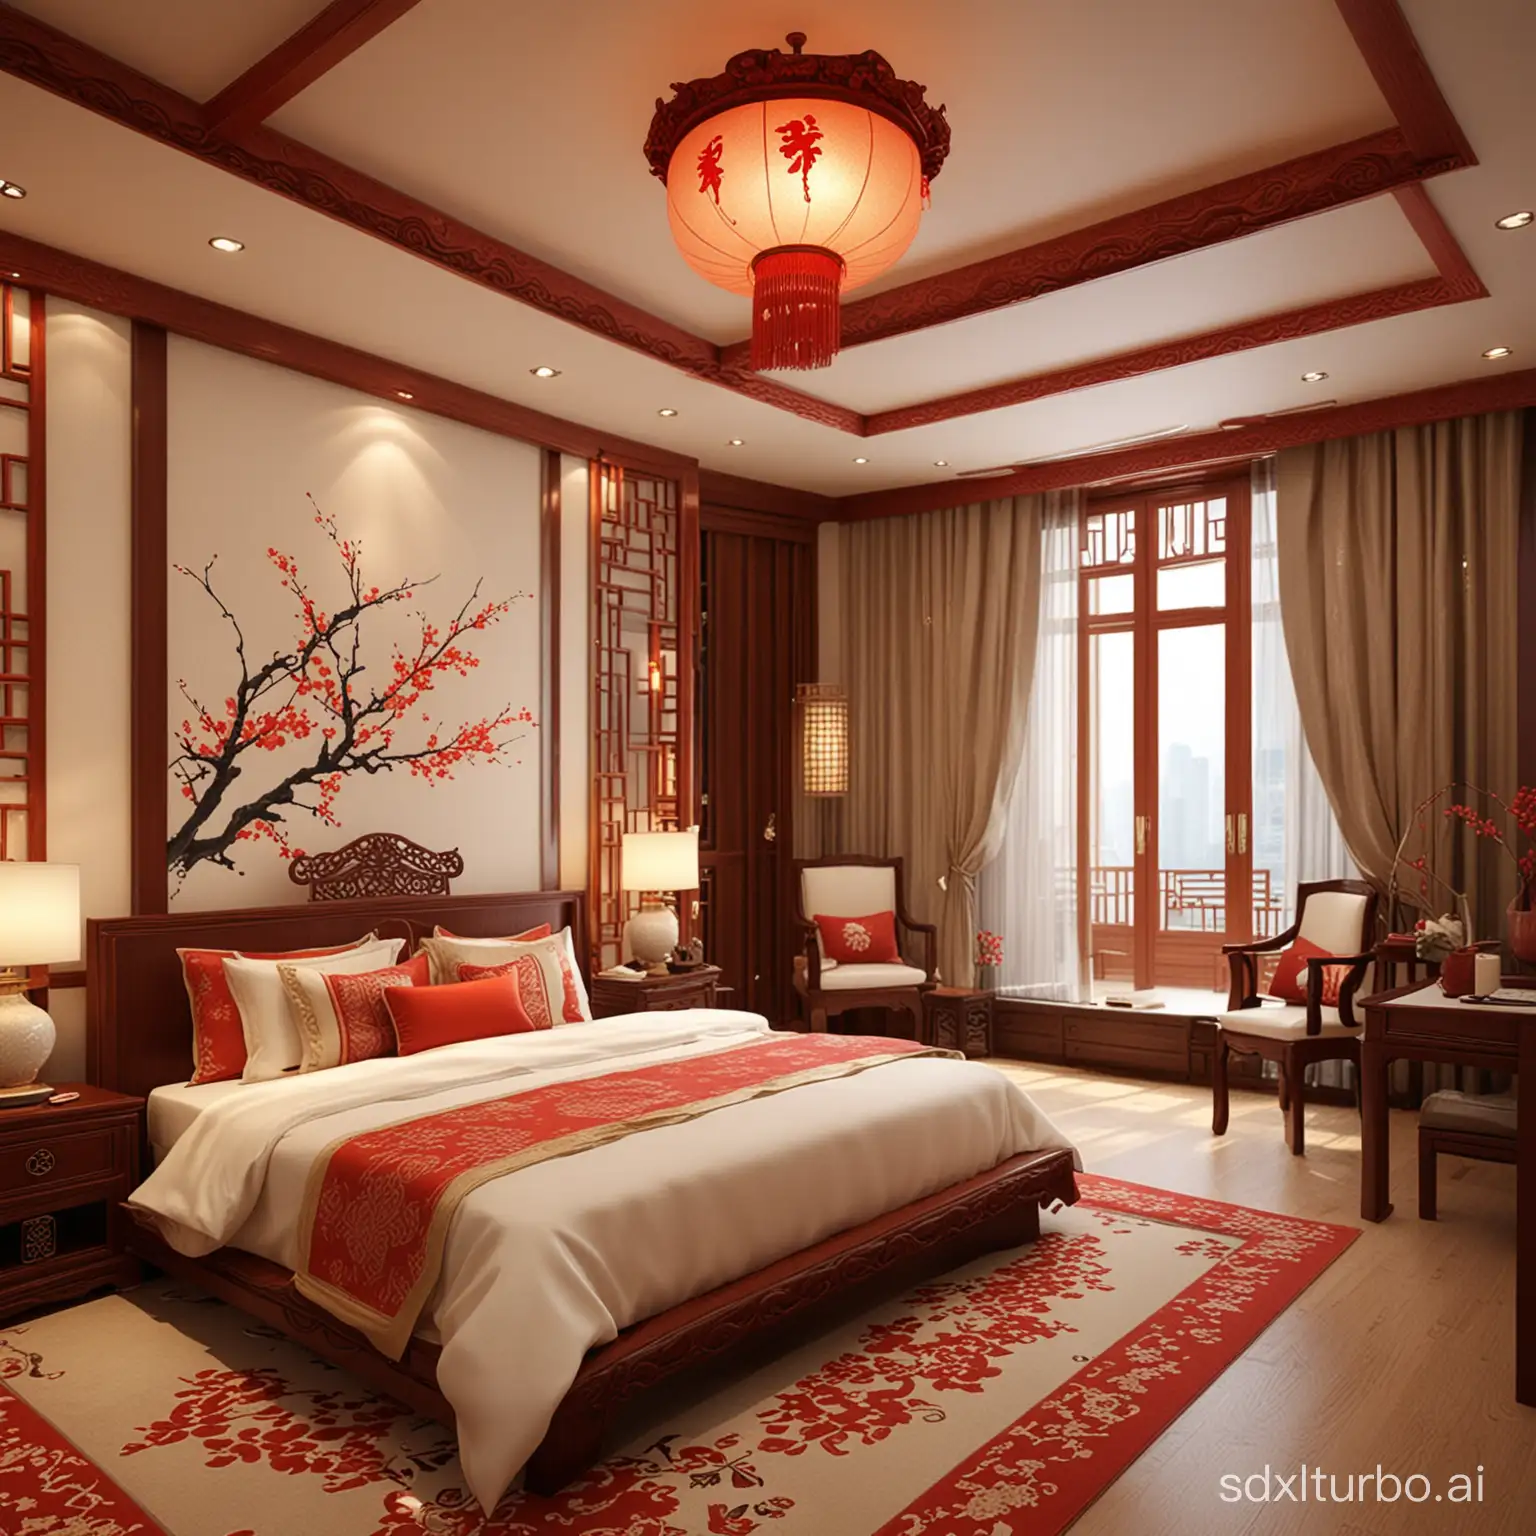 Chinese-style interior bedroom design